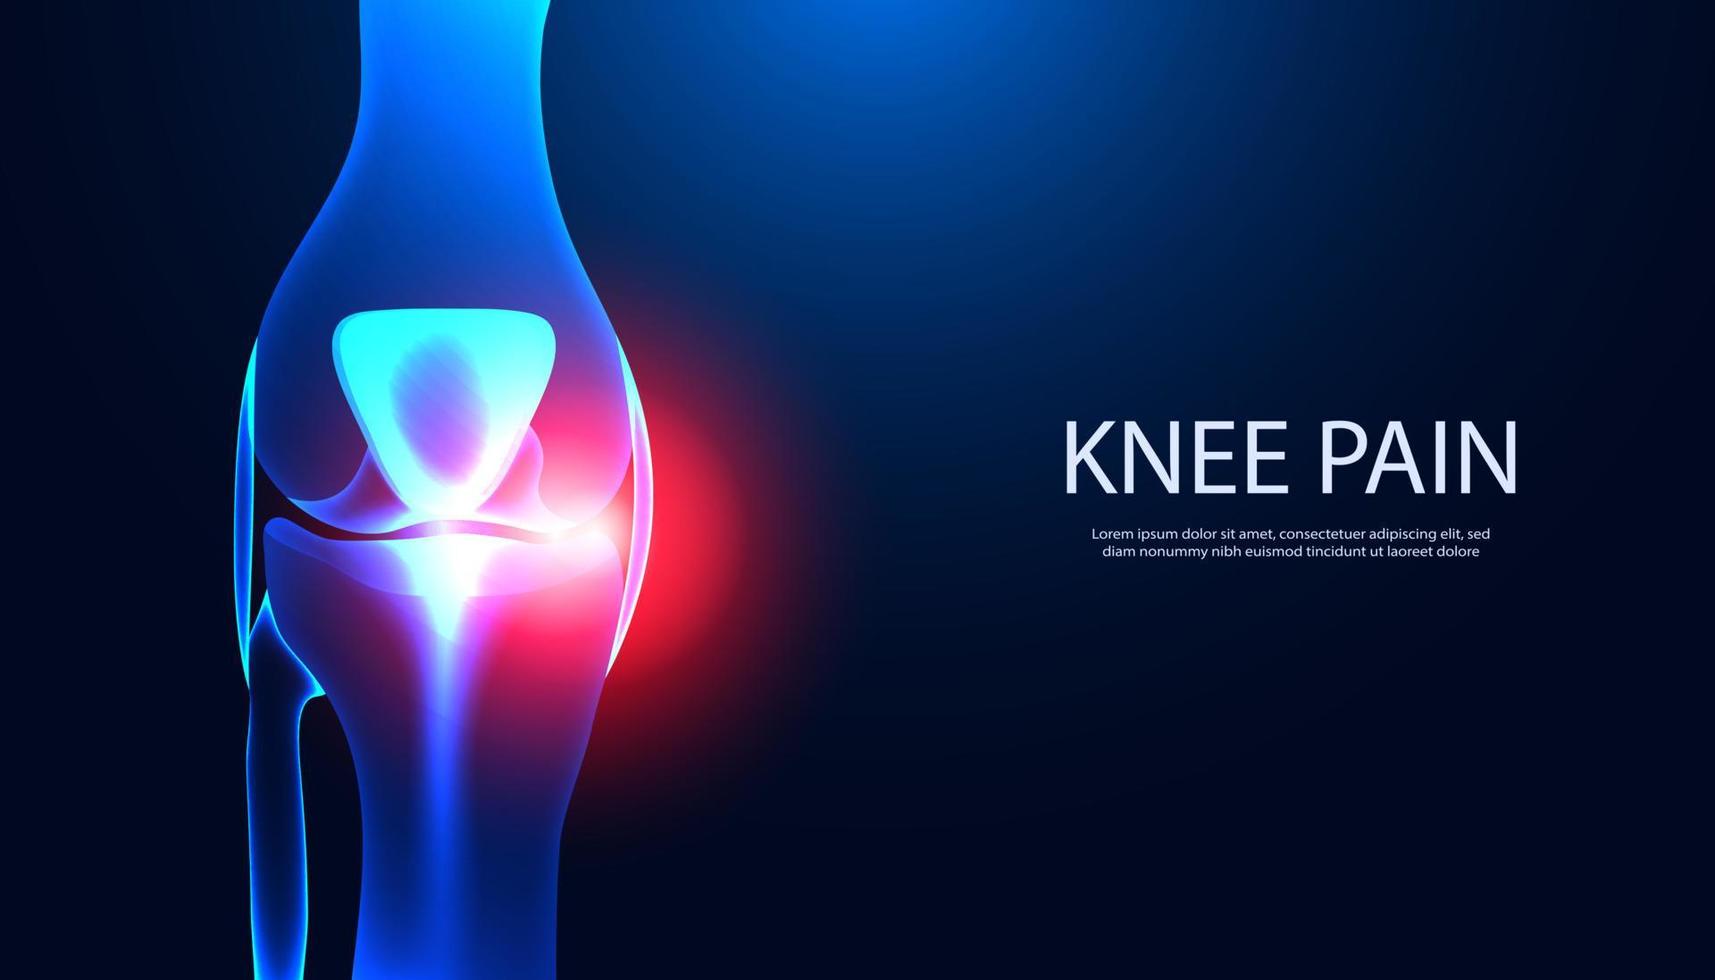 Abstract Bone, Knee part Anatomy X-ray model showing knee injury with red light. For inserting text, articles or templates vector